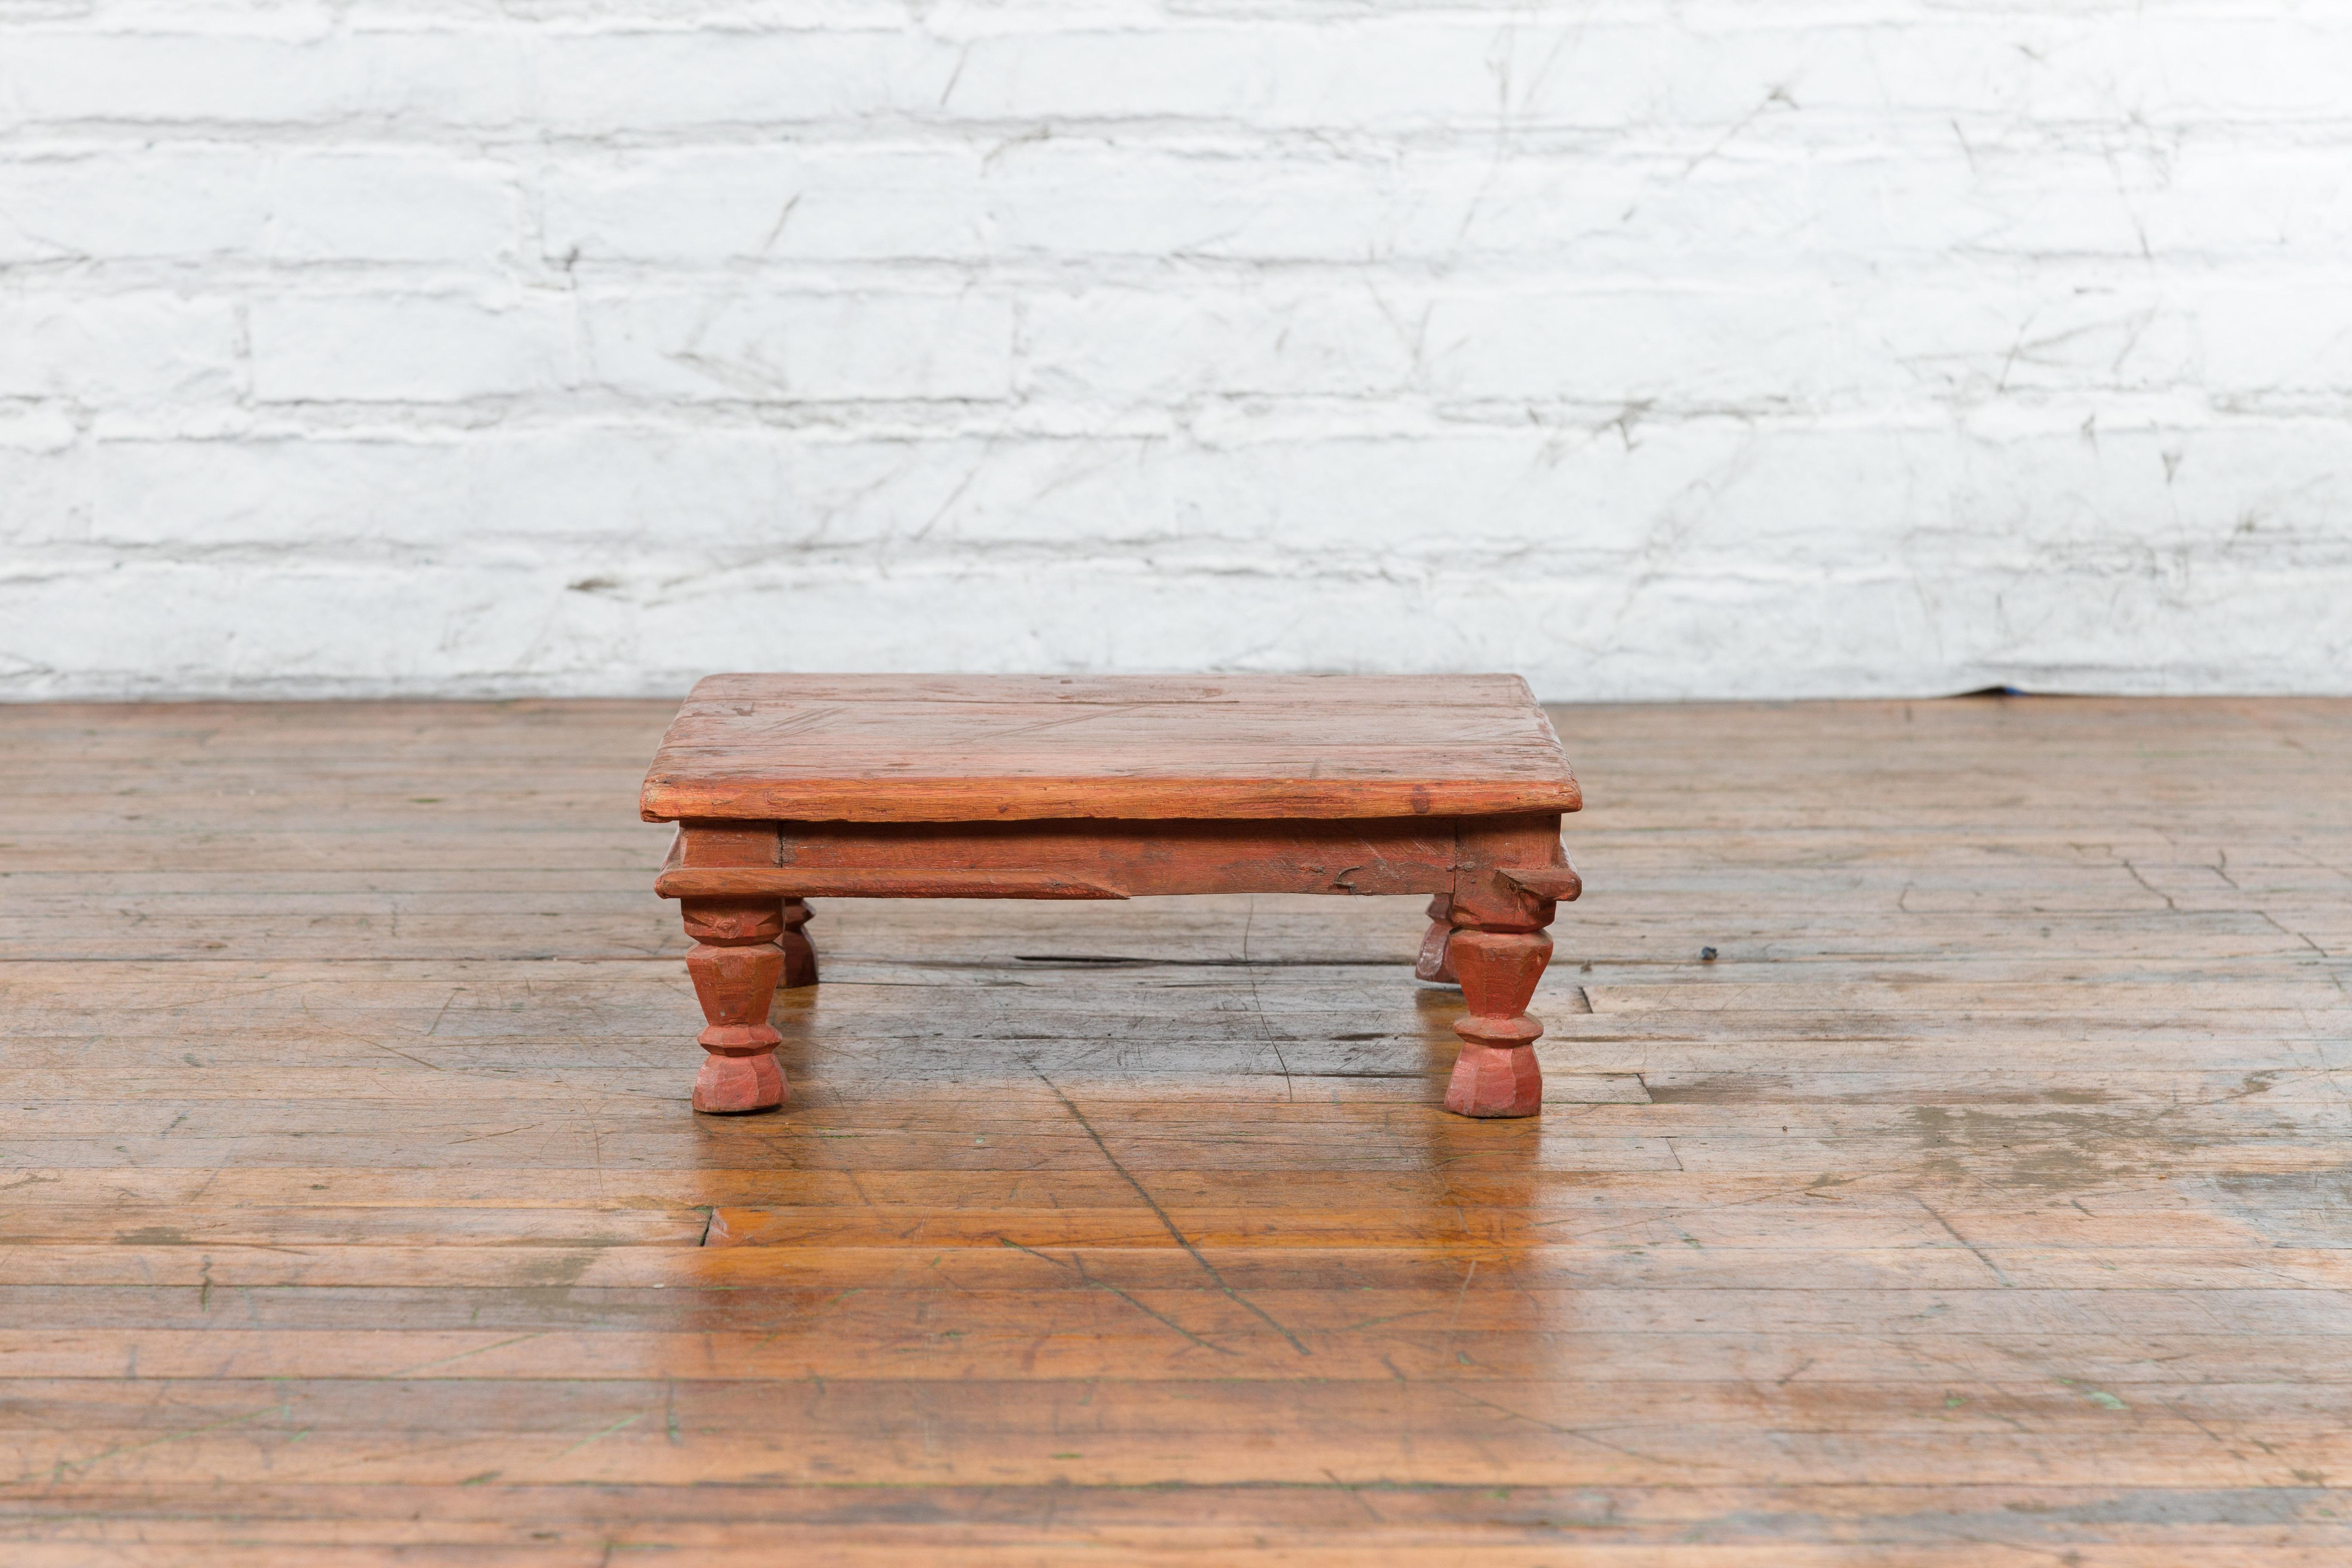 Antique Indian Low Wooden Prayer Table Stand with Carved Angular Legs For Sale 4